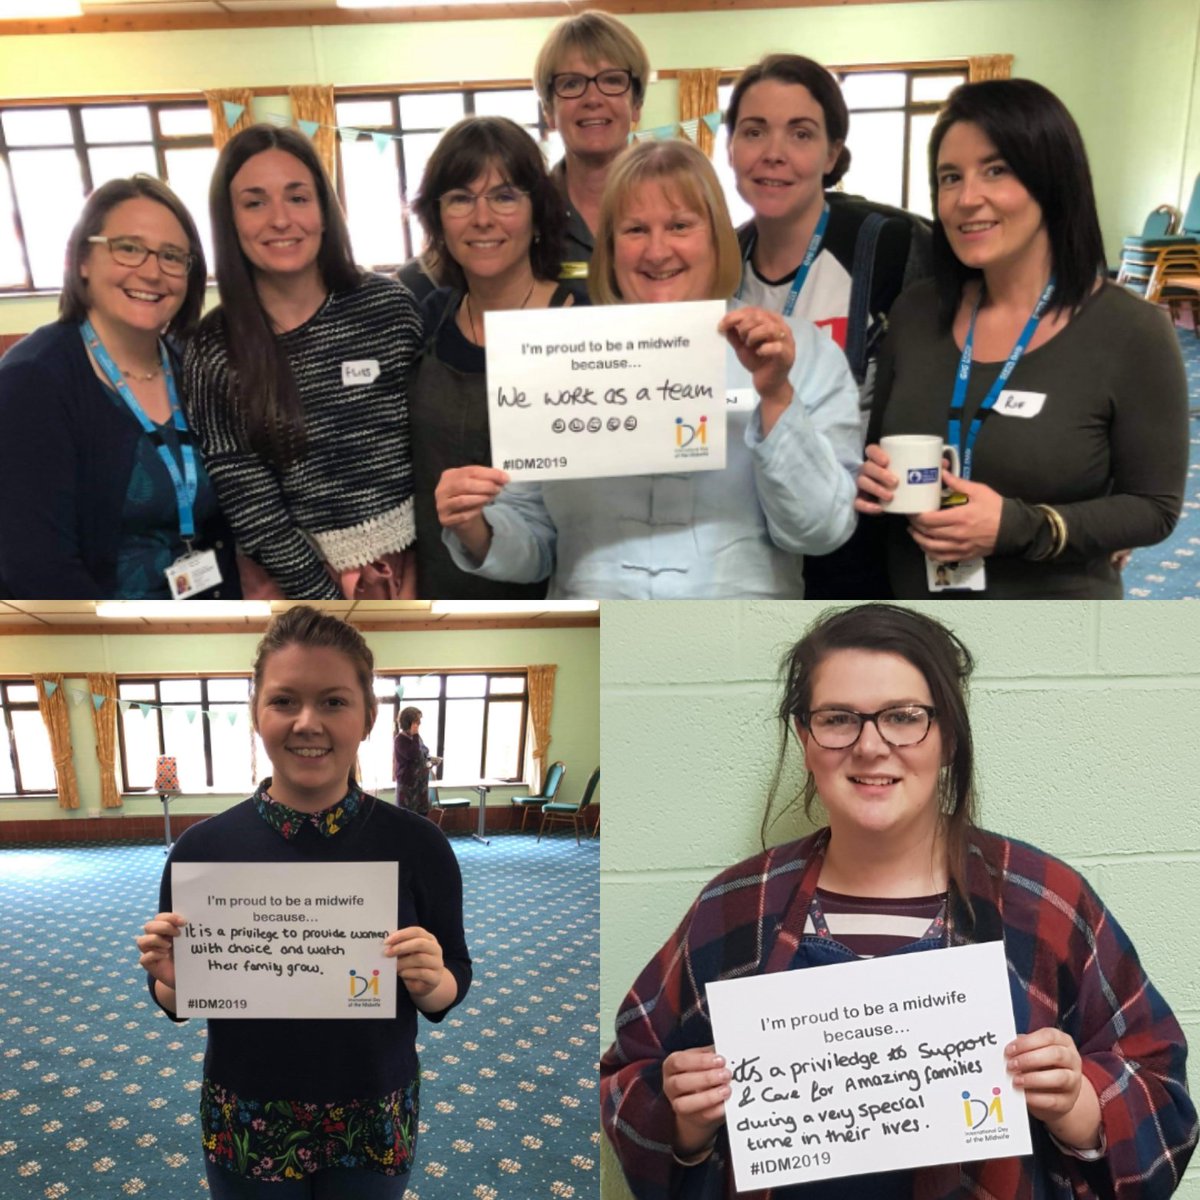 Celebrating #IDM2019 with our lovely colleagues! #teamwork #midwives #withwoman #welshmidwives @RcmWales